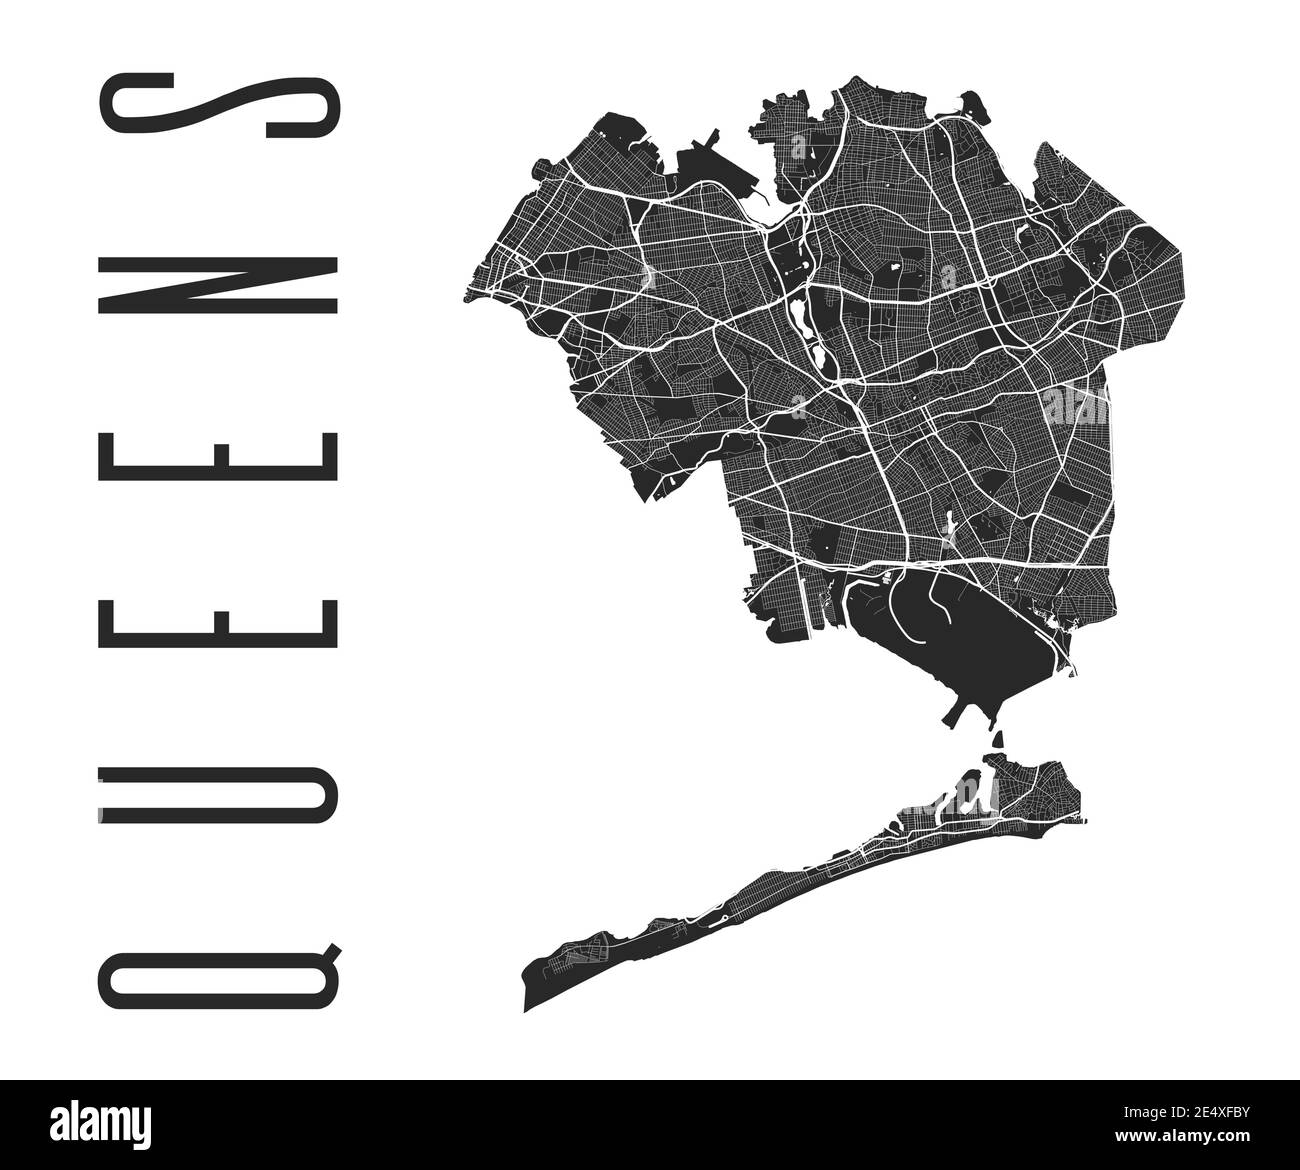 Queens map poster. New York city borough street map. Cityscape aria panorama silhouette aerial view, typography style. Flushing Meadows, Corona, Field Stock Vector